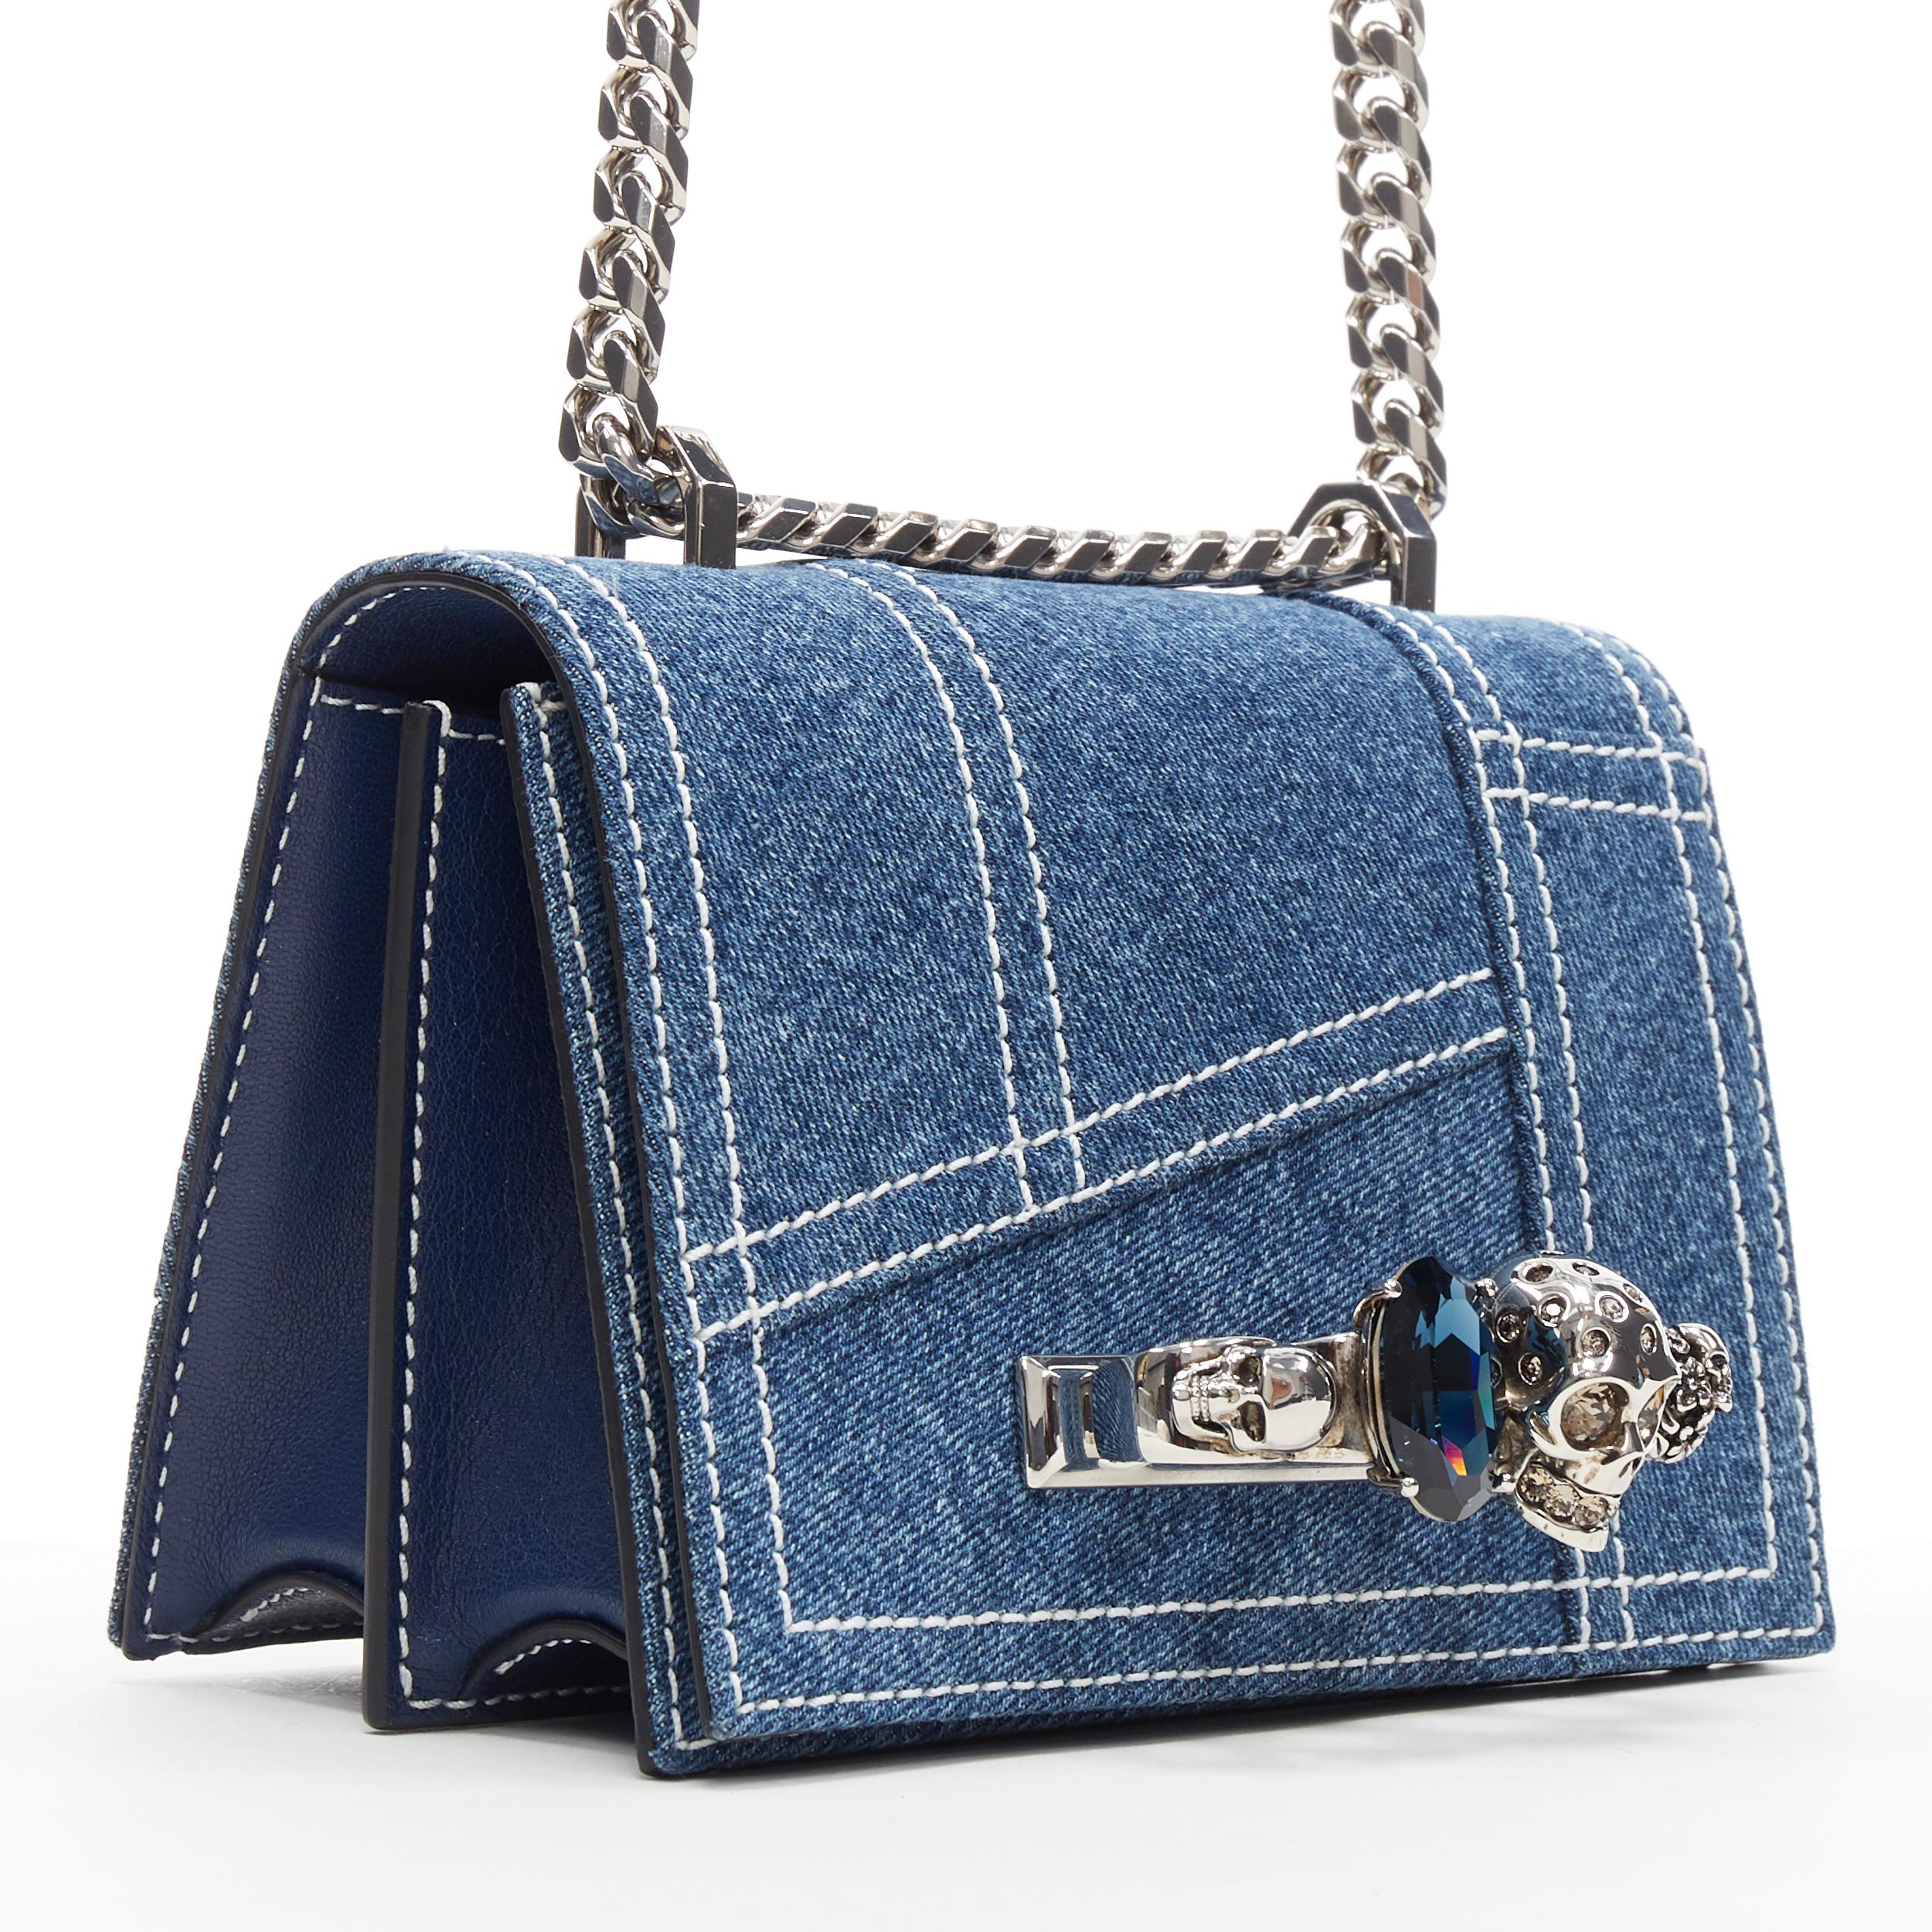 new ALEXANDER MCQUEEN denim overstitch skull knuckle duster chain crossbody bag 
Brand: Alexander Mcqueen
Model Name / Style: Knuckle crossbody
Material: Denim
Color: Blue
Pattern: Solid
Closure: Magnetic
Extra Detail:
Made in: Italy

CONDITION: